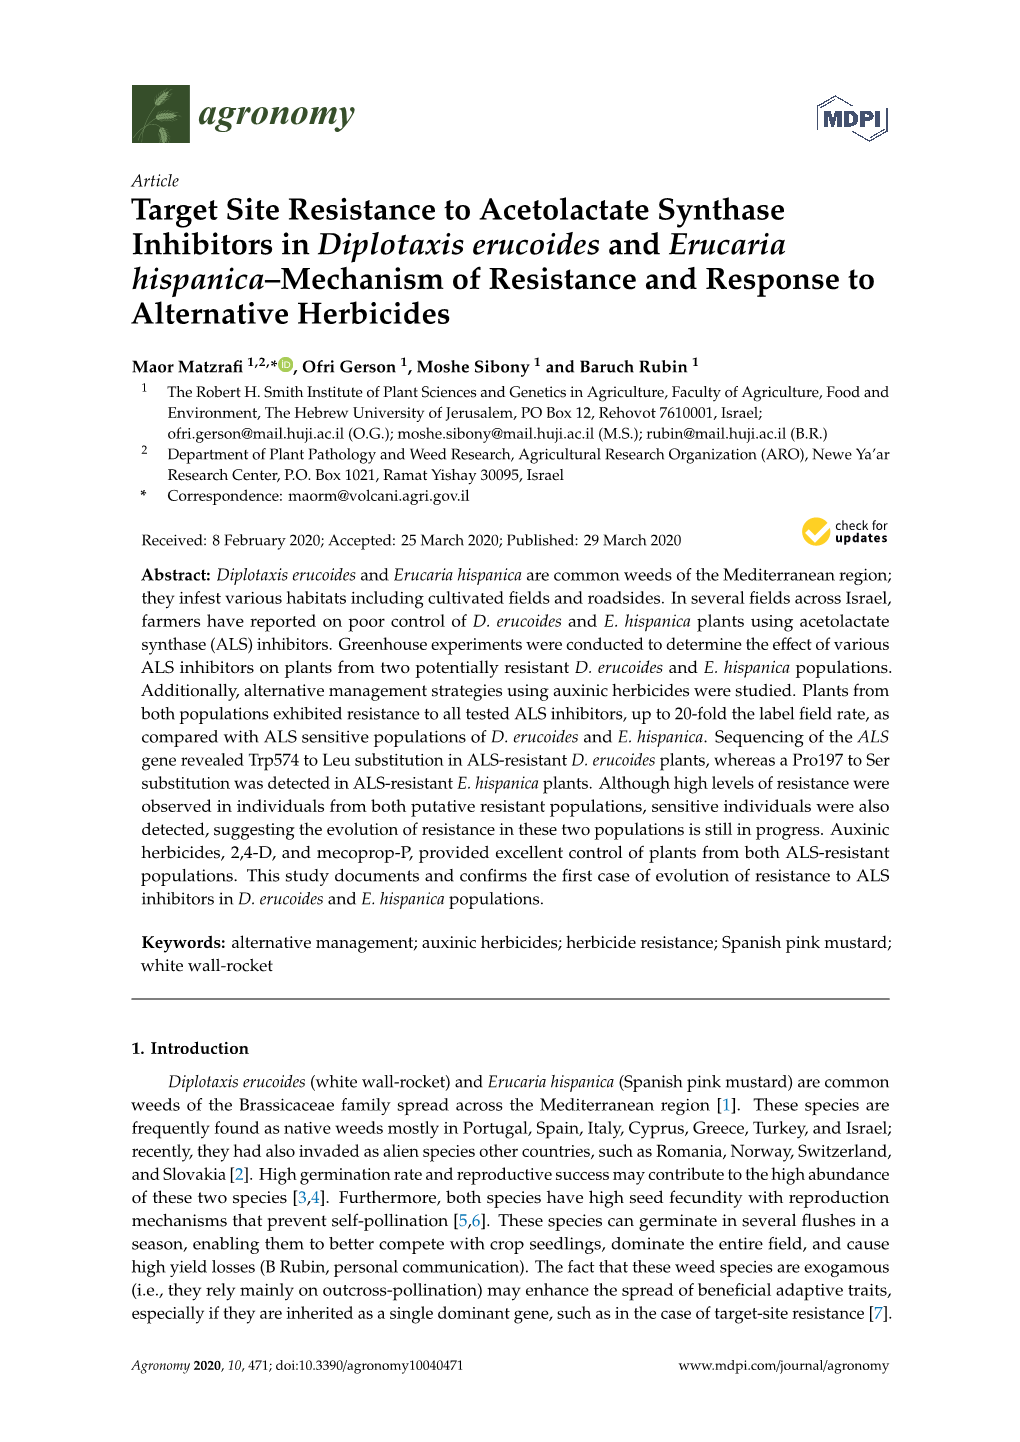 Target Site Resistance to Acetolactate Synthase Inhibitors in Diplotaxis Erucoides and Erucaria Hispanica–Mechanism of Resista